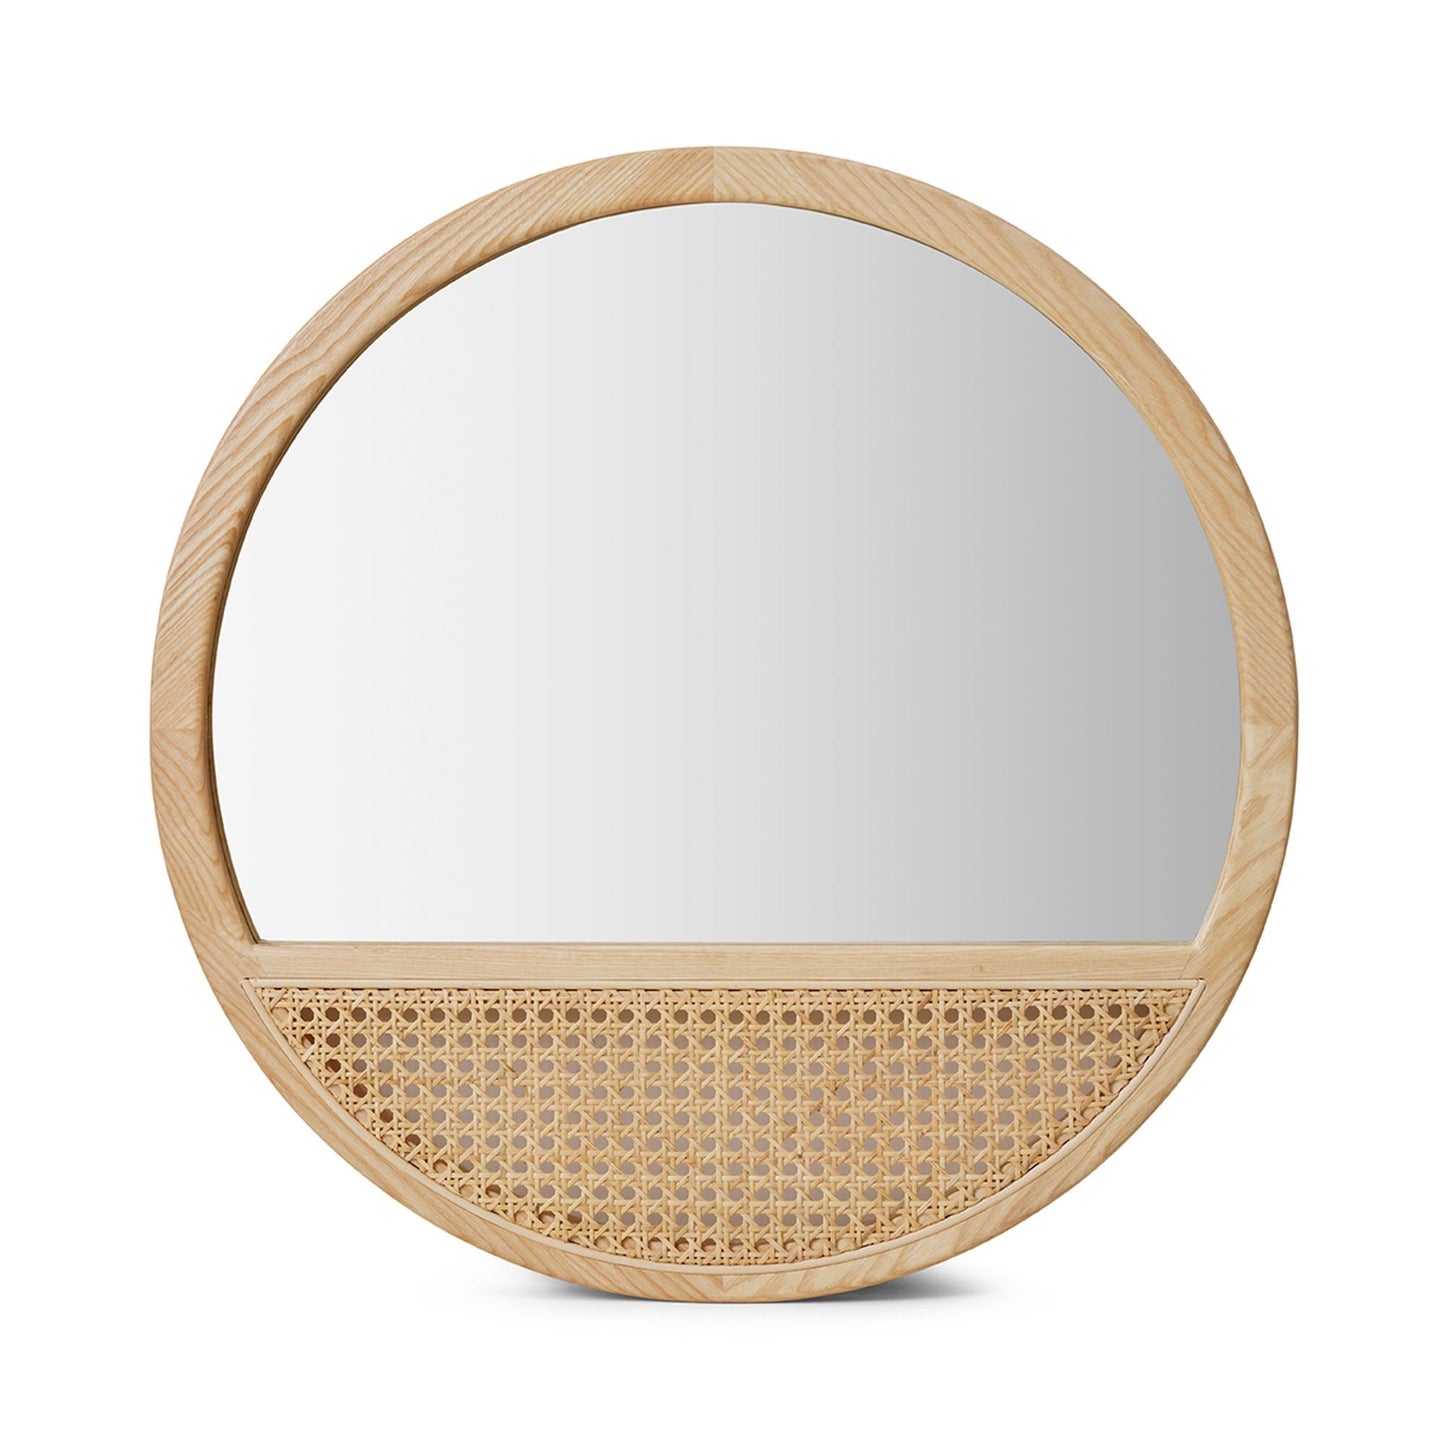 Wick Mirror by Stori #Natural